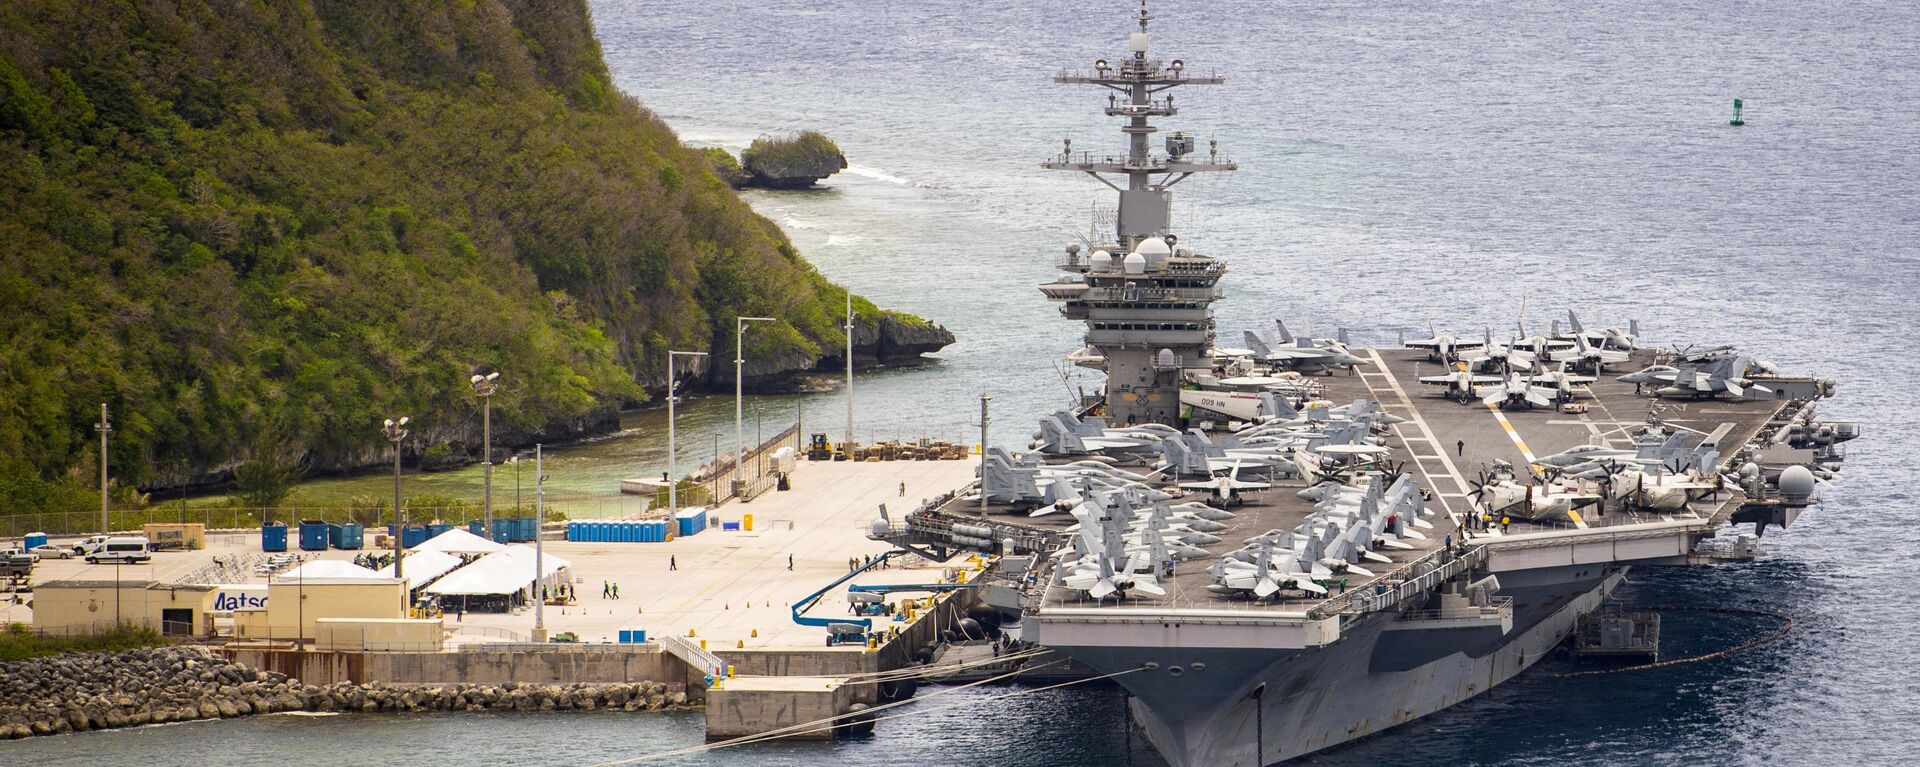 The aircraft carrier USS Theodore Roosevelt (CVN 71) is moored pier side at Naval Base Guam May 15, 2020. Theodore Roosevelt's COVID-negative crew returned from quarantine beginning on April 29 and is making preparations to return to sea to continue their scheduled deployment to the Indo-Pacific. - Sputnik International, 1920, 30.11.2021